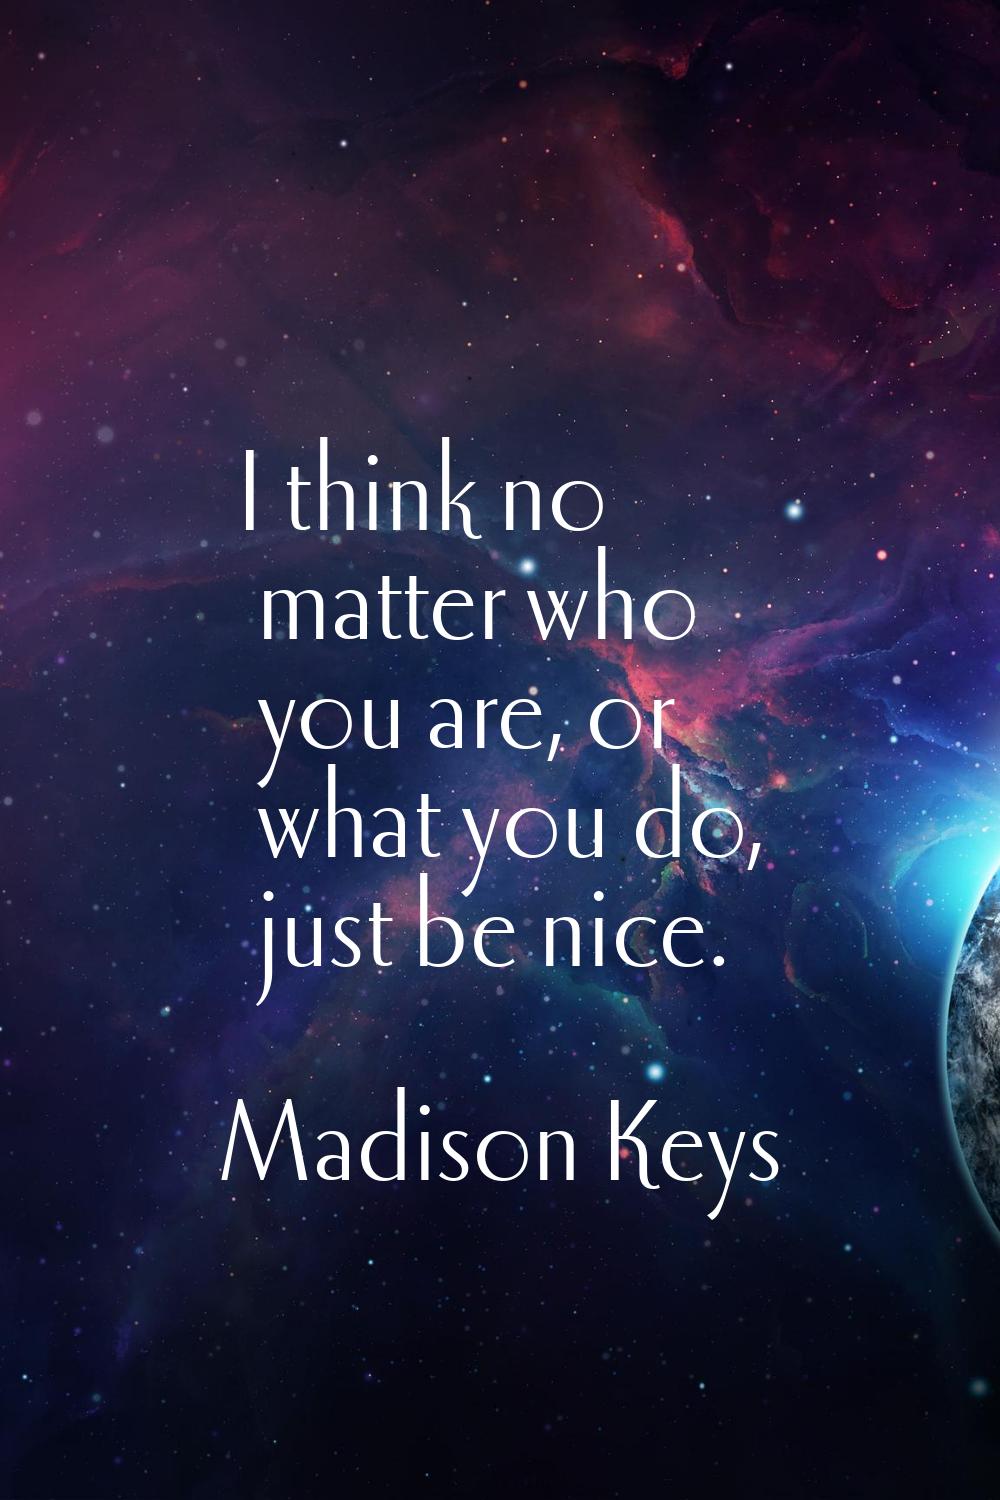 I think no matter who you are, or what you do, just be nice.